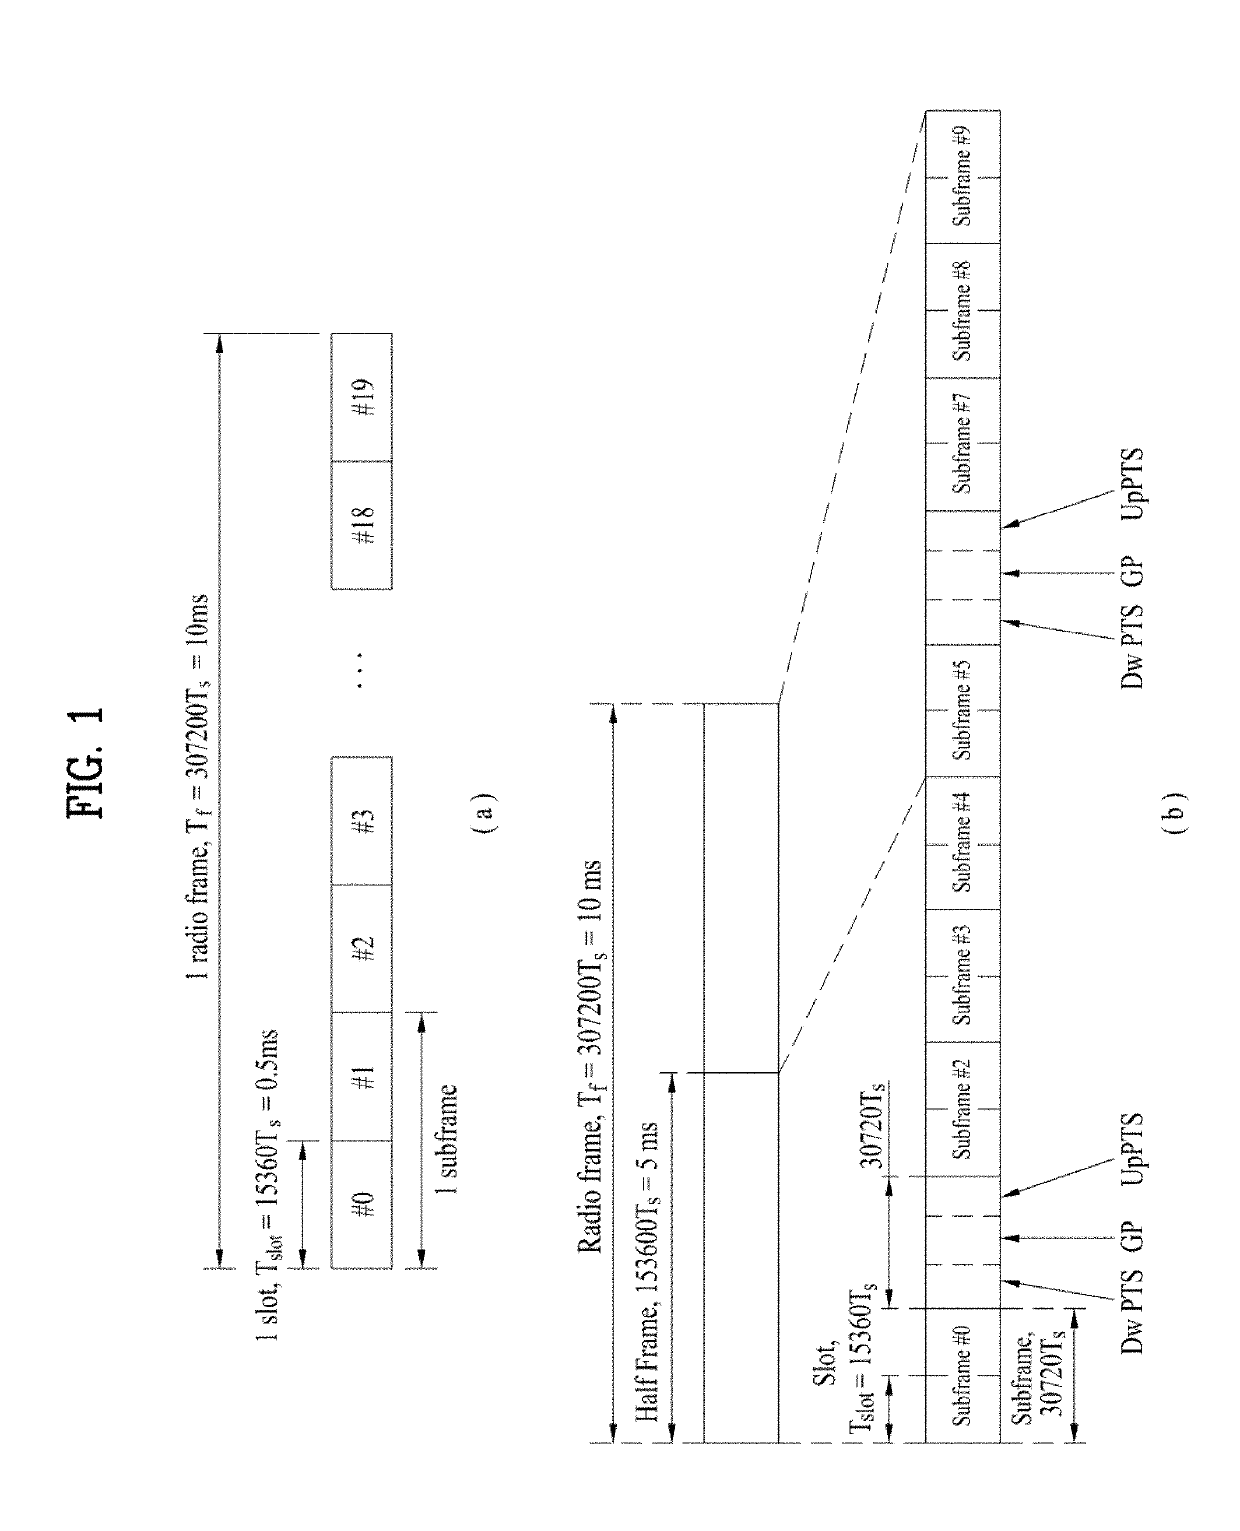 Method And User Equipment For Receiving Donwlink Signal, Method And Base Station For Transmitting Downlink Signal